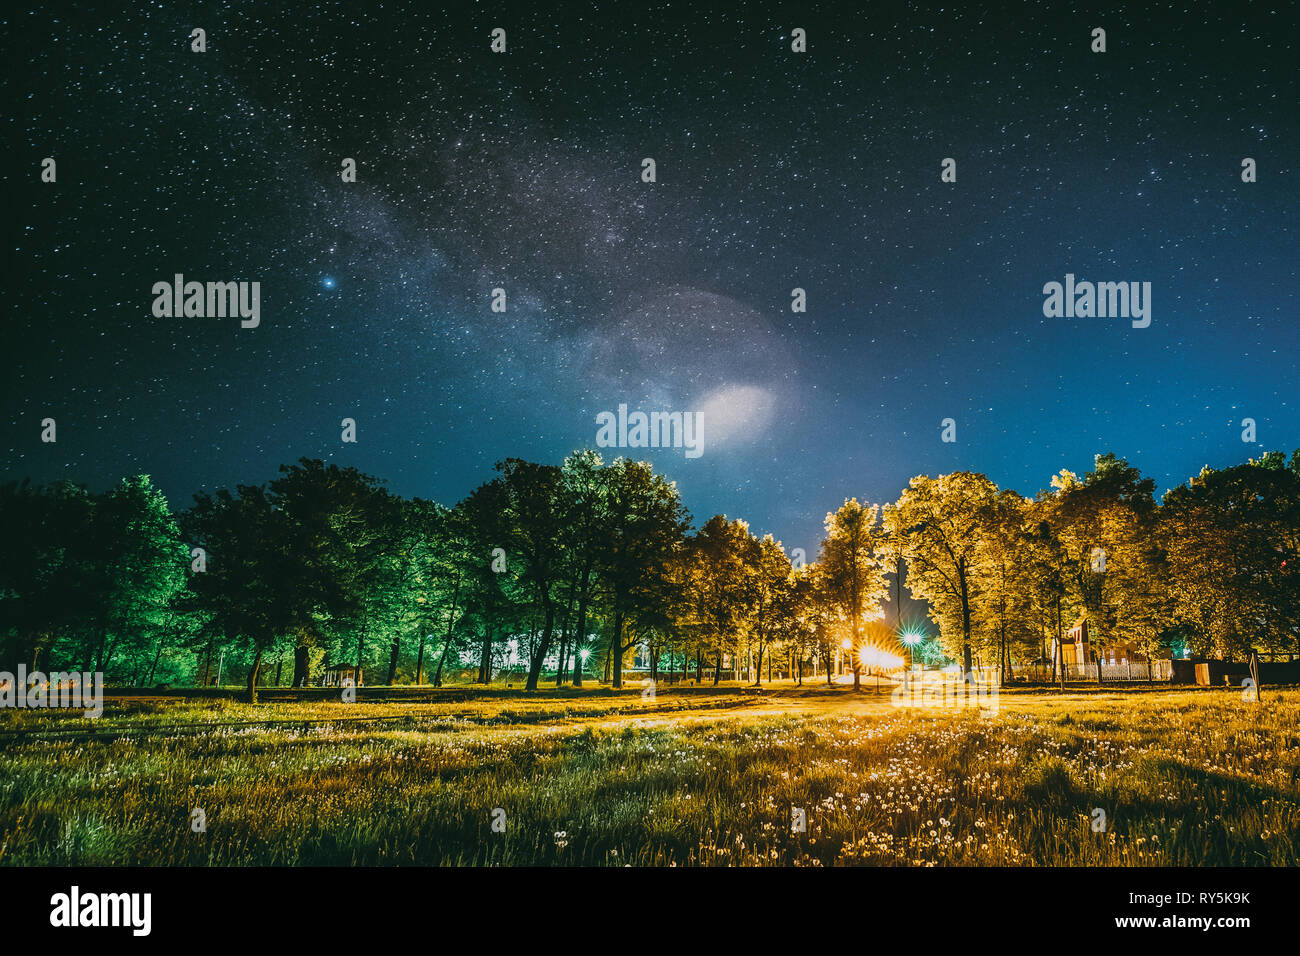 Green Trees Woods In Park Under Night Starry Sky. Night Landscape With Natural Real Glowing Milky Way Stars Over Meadow At Summer Season. View From Stock Photo